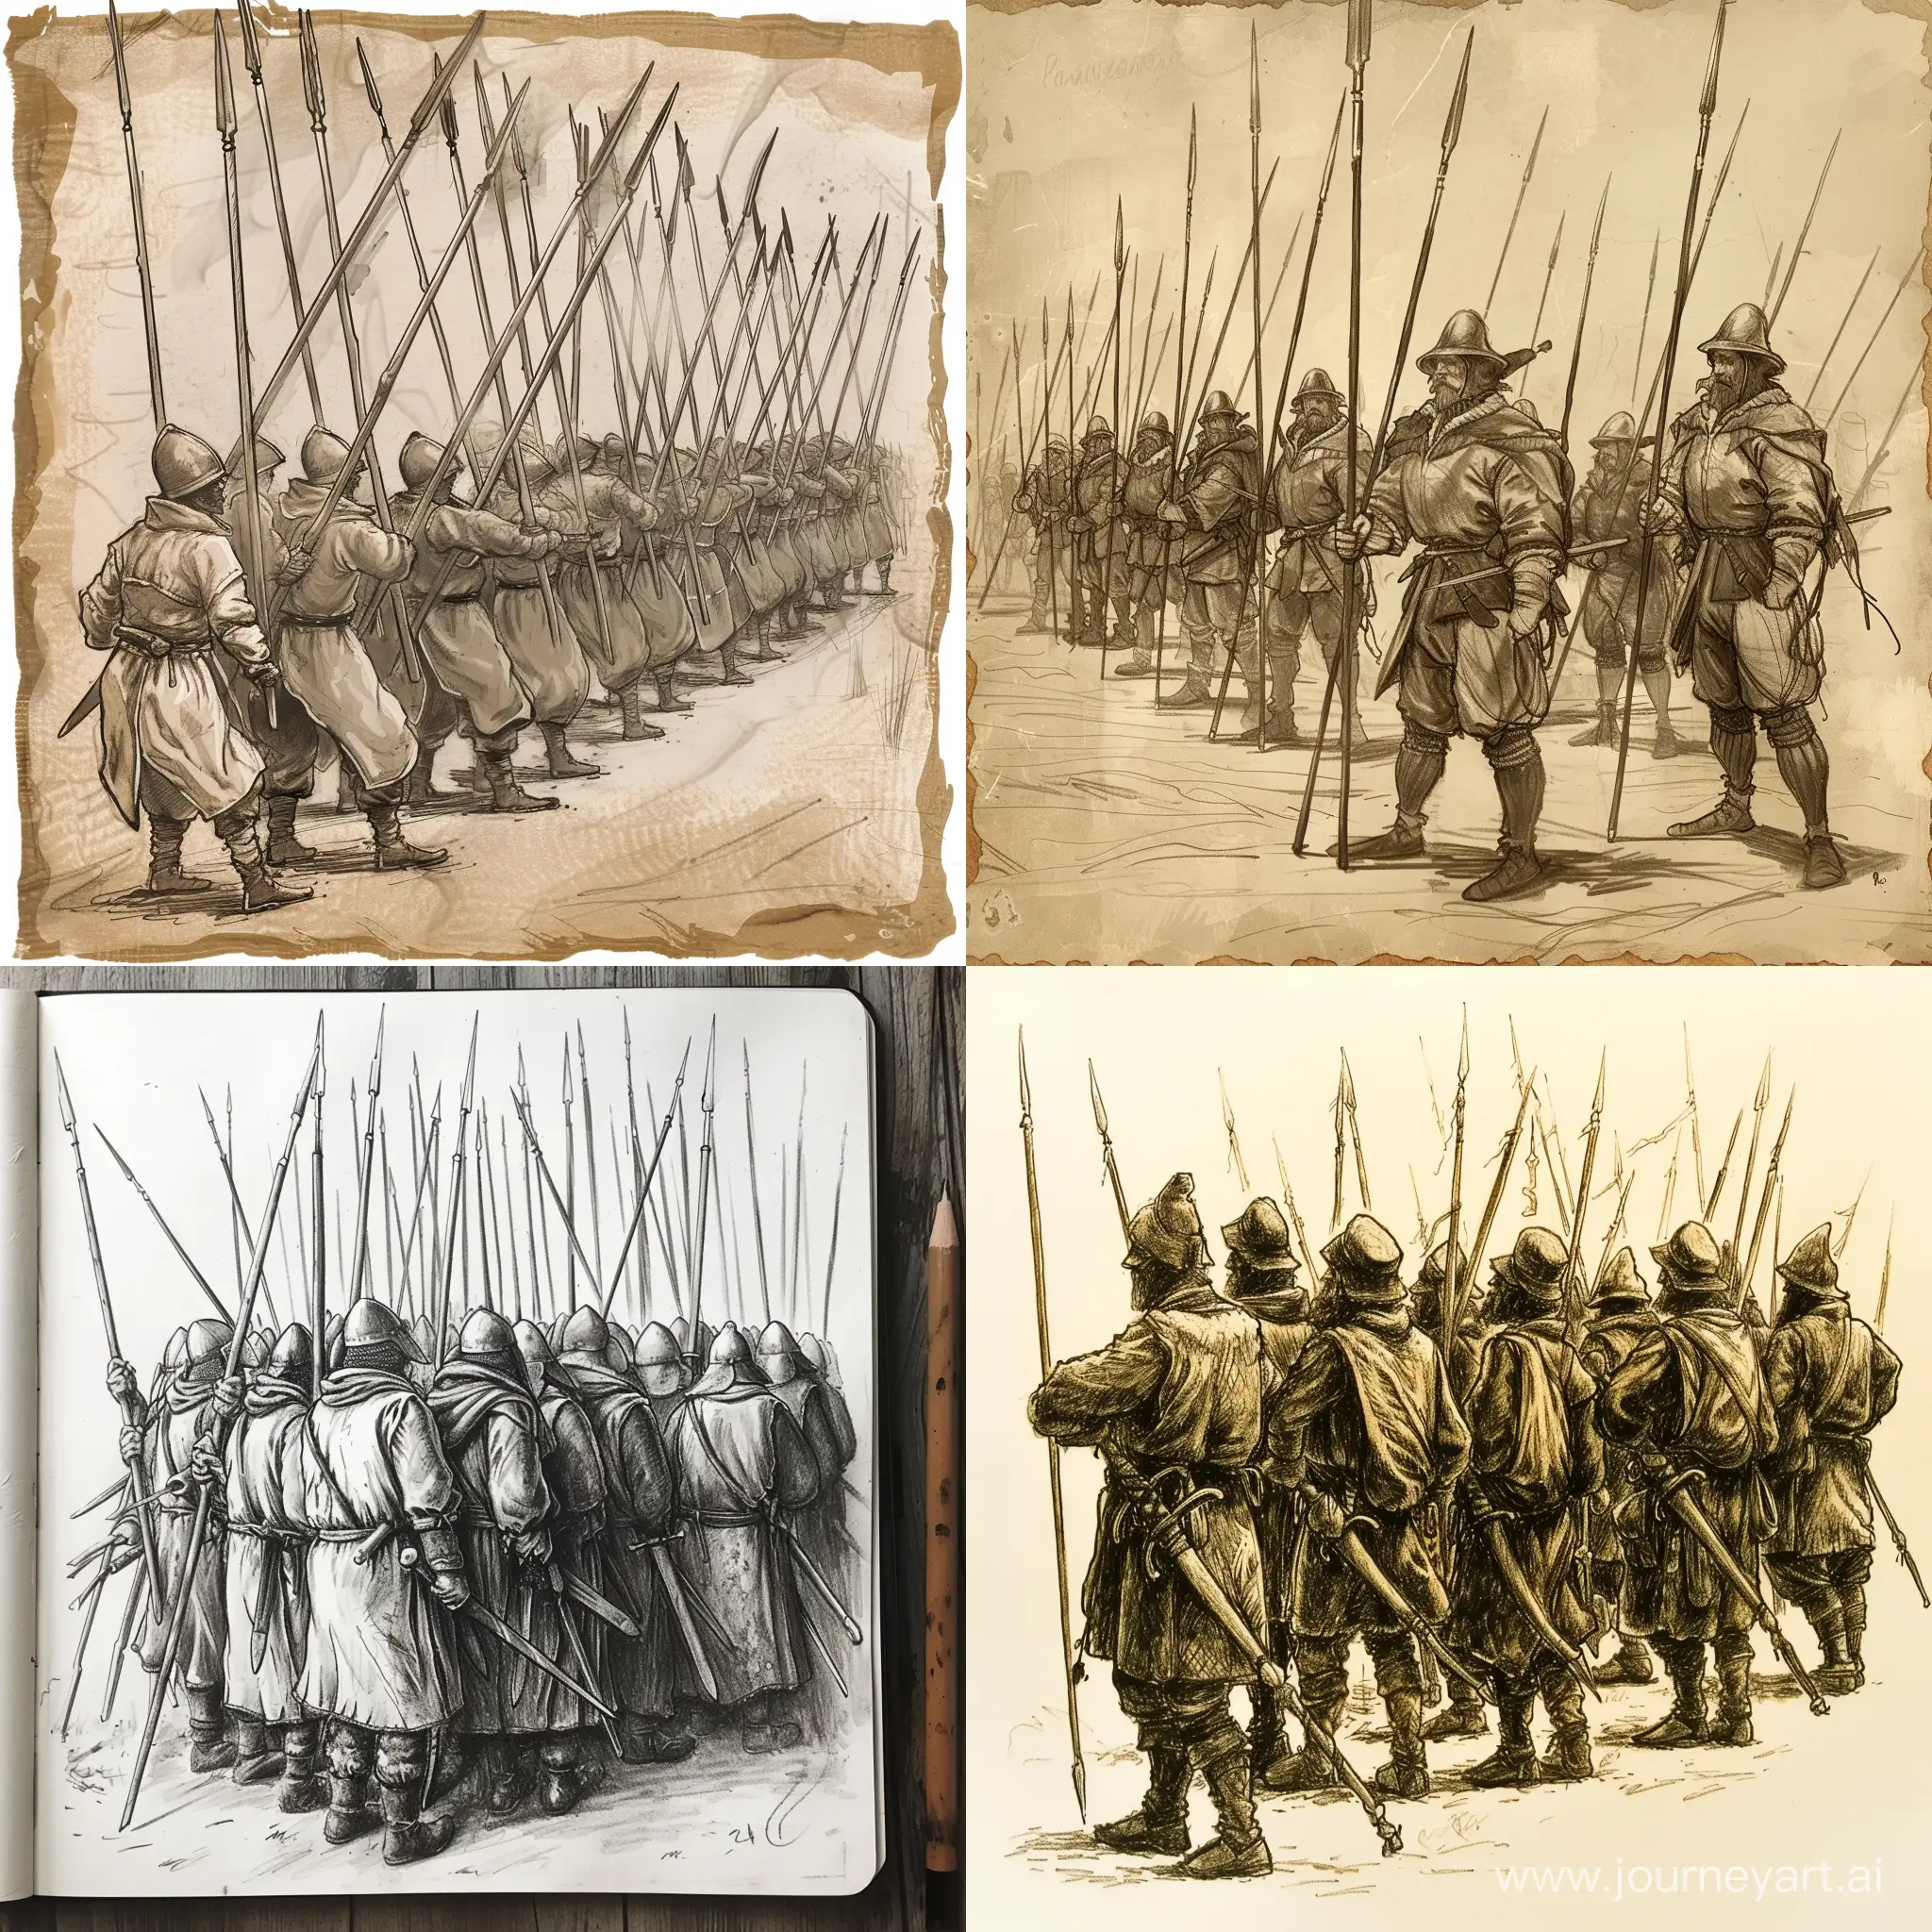 Draw a medieval peasant militia with spears